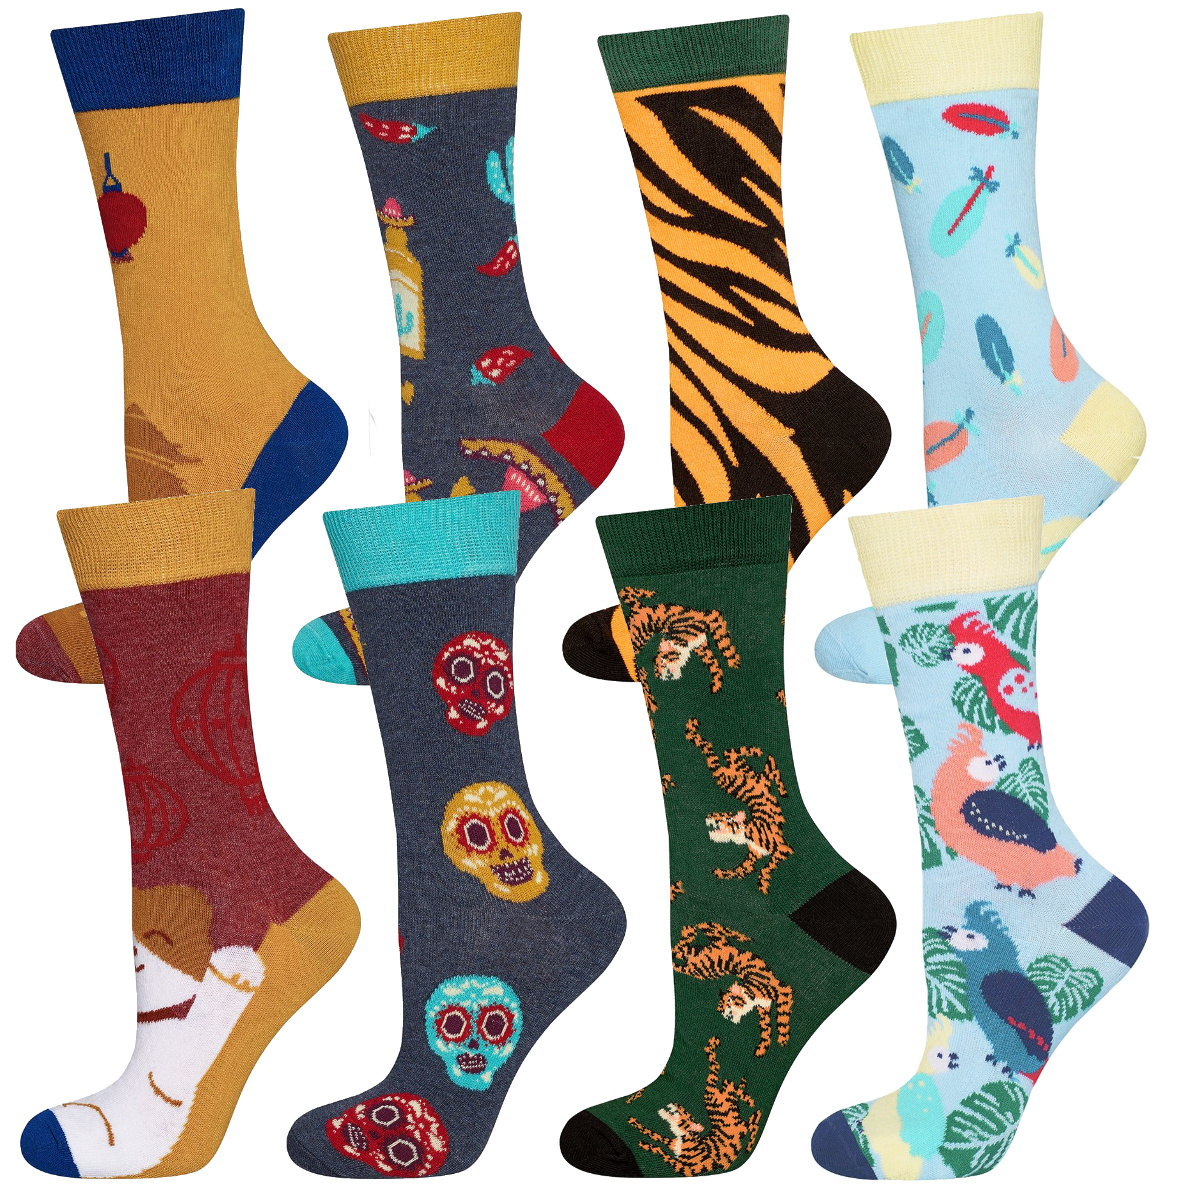 Set of 4x Colorful SOXO women's socks mismatched funny gift - 17